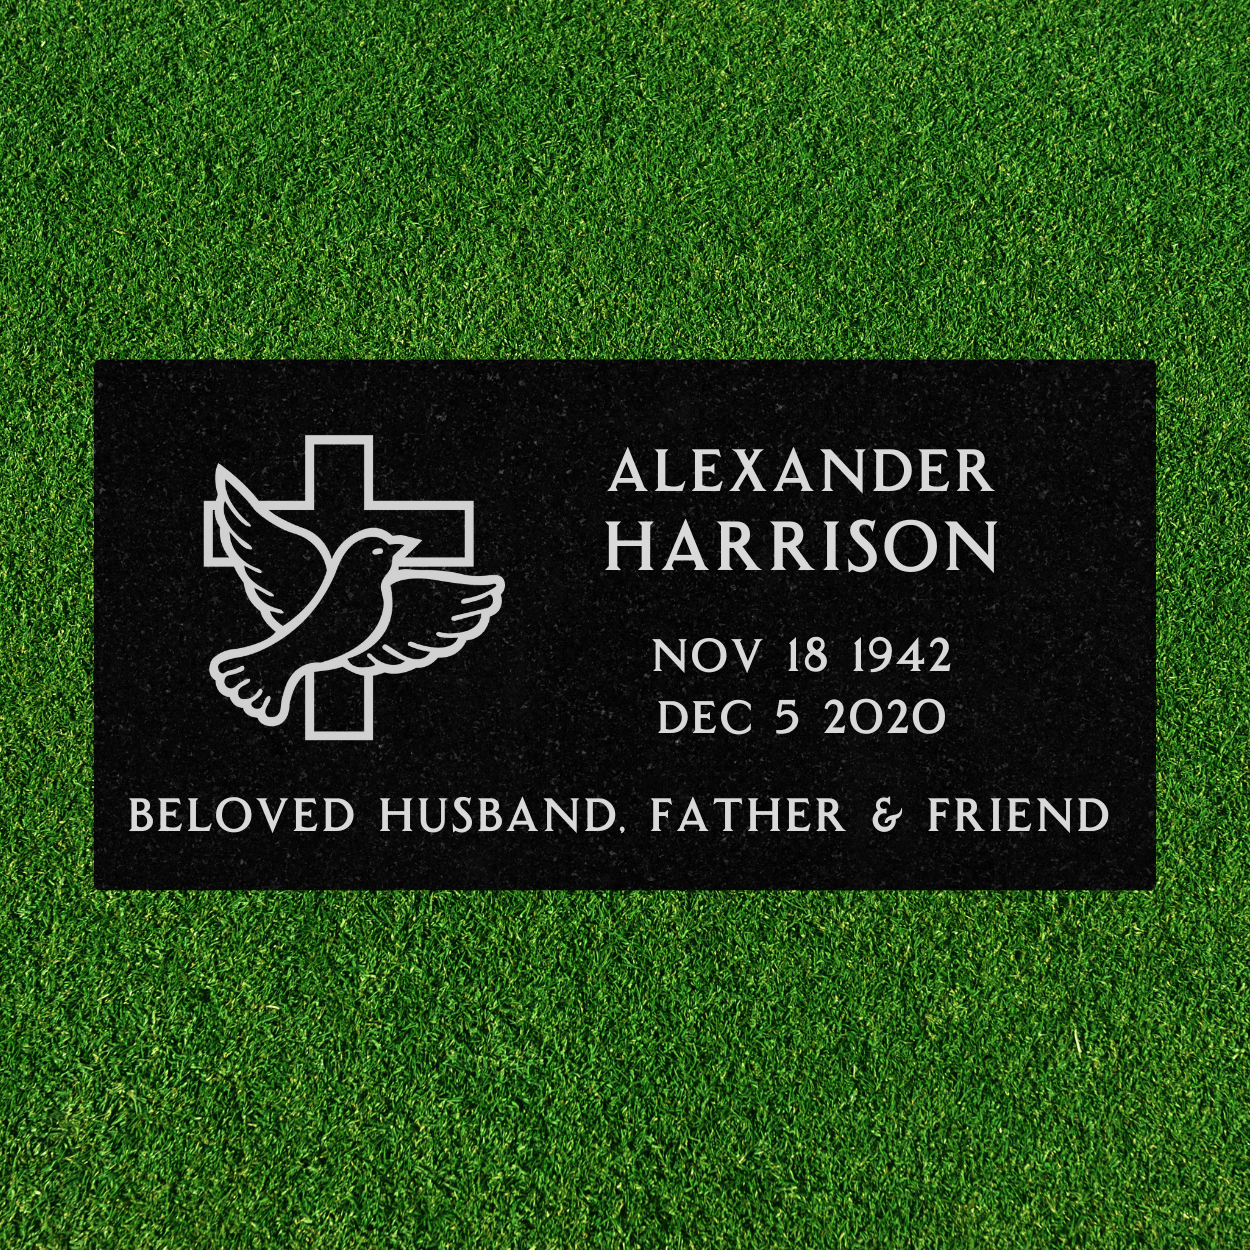 Black Granite - Flat Headstone Marker with One Symbol - (24in x 12in x 4in) - Markers & Headstones